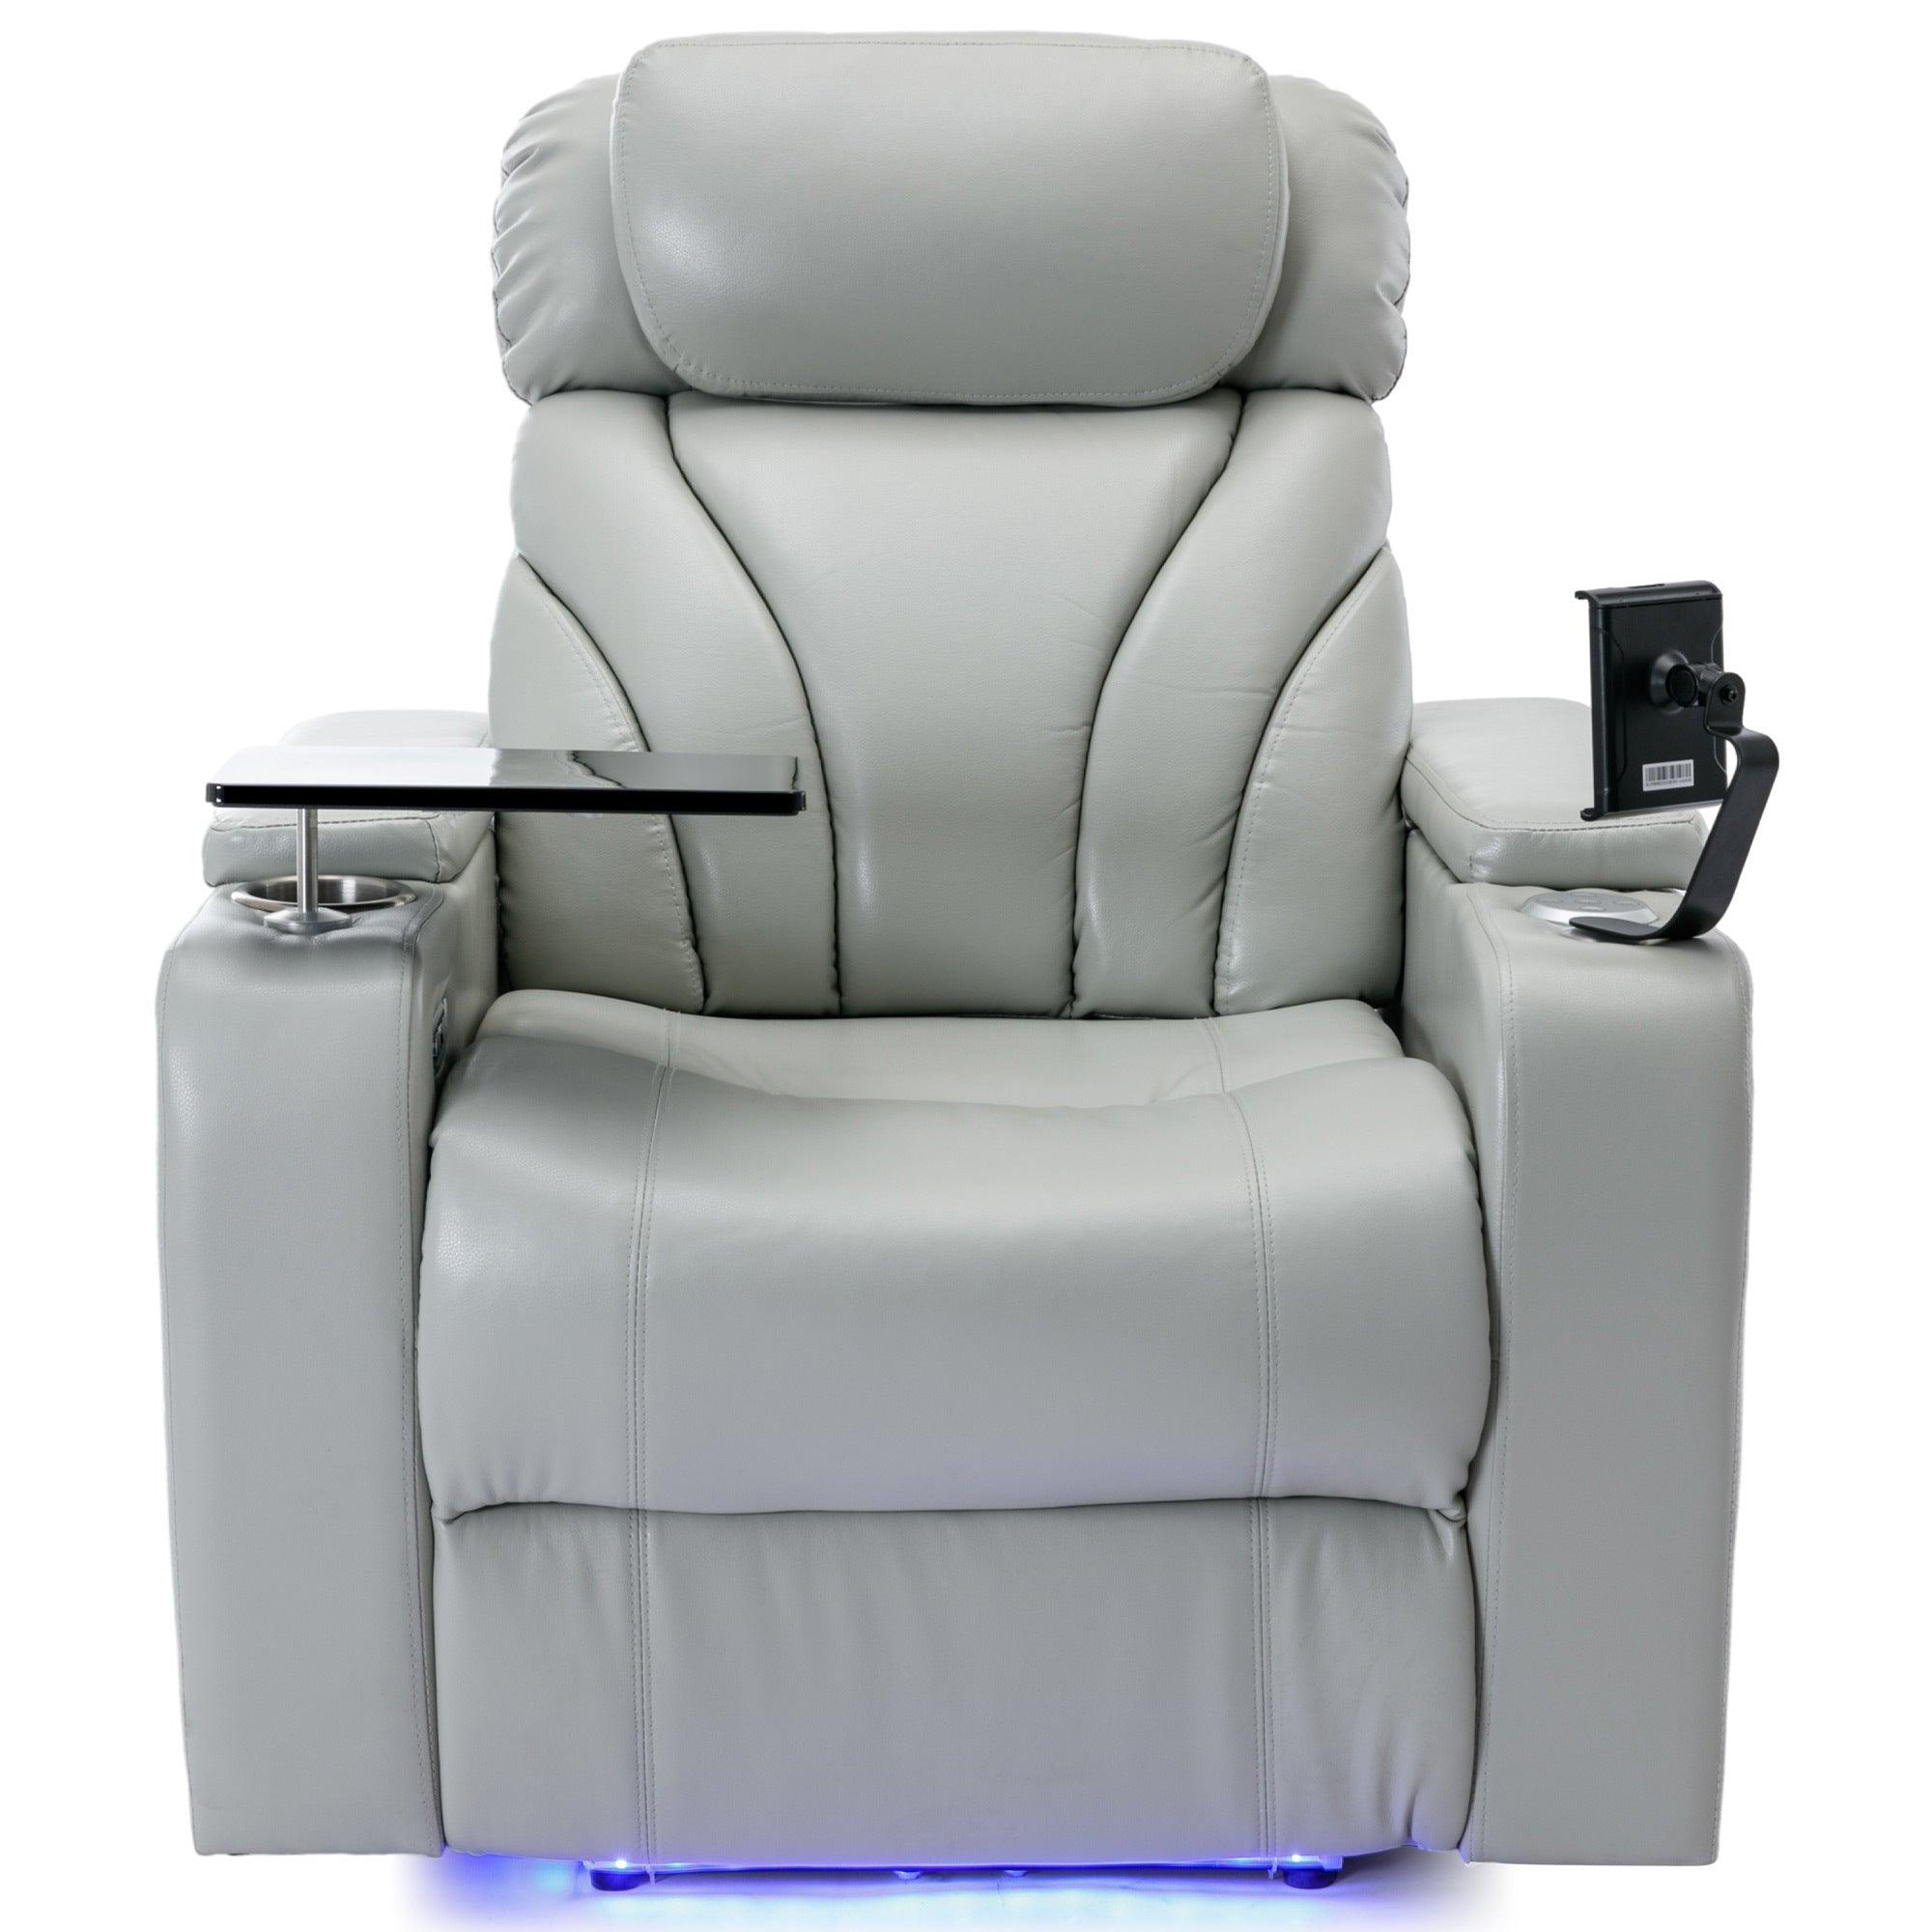 🆓🚛 Power Motion Recliner With Usb Charging Port & Hidden Arm Storage, Home Theater Seating With Convenient Cup Holder Design, & Stereo, Light Gray